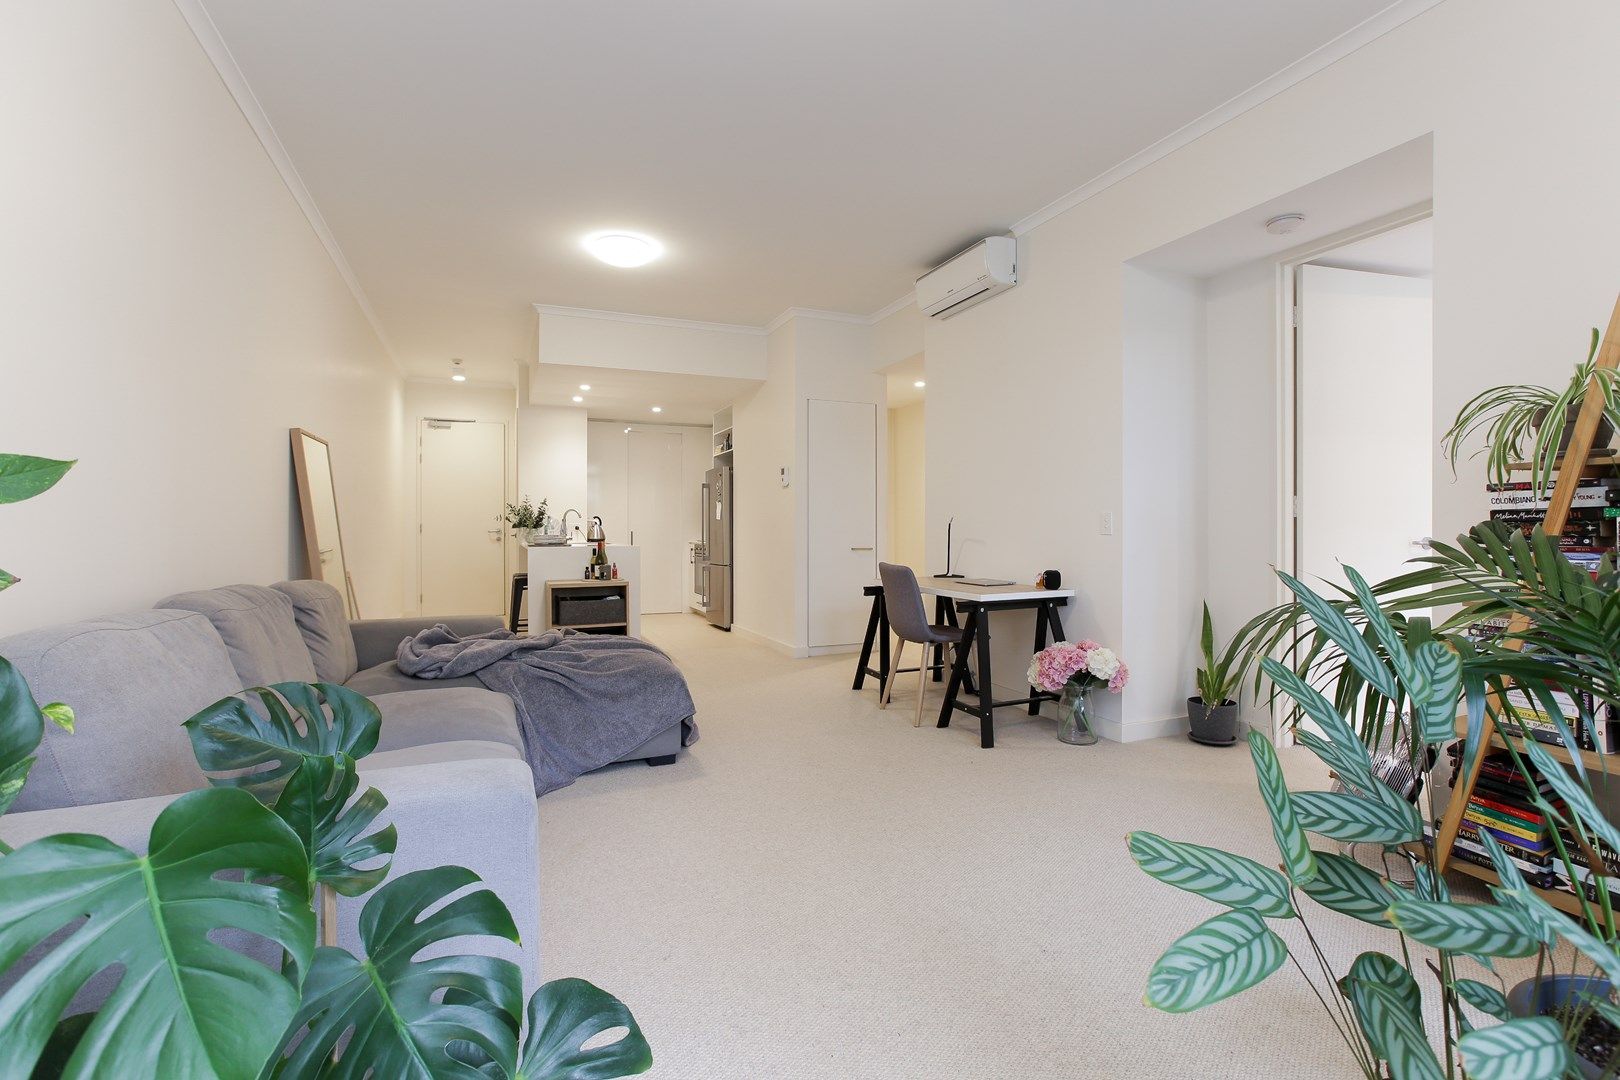 1 bedrooms Apartment / Unit / Flat in 57/1 Silas Street EAST FREMANTLE WA, 6158